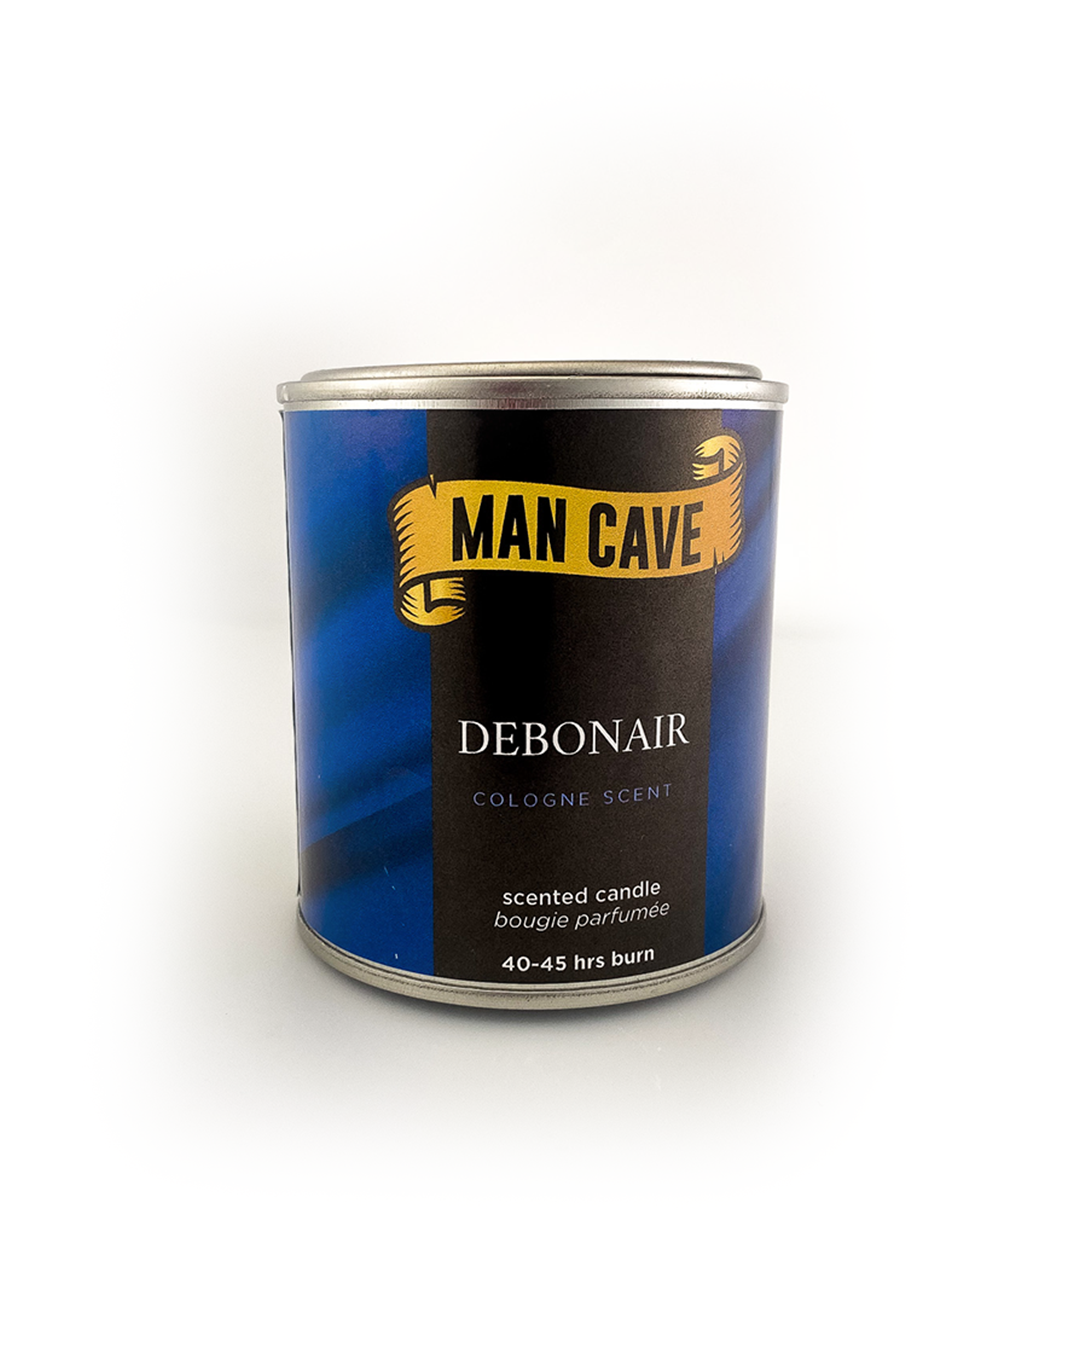 Debonair - Cologne Scented Candle